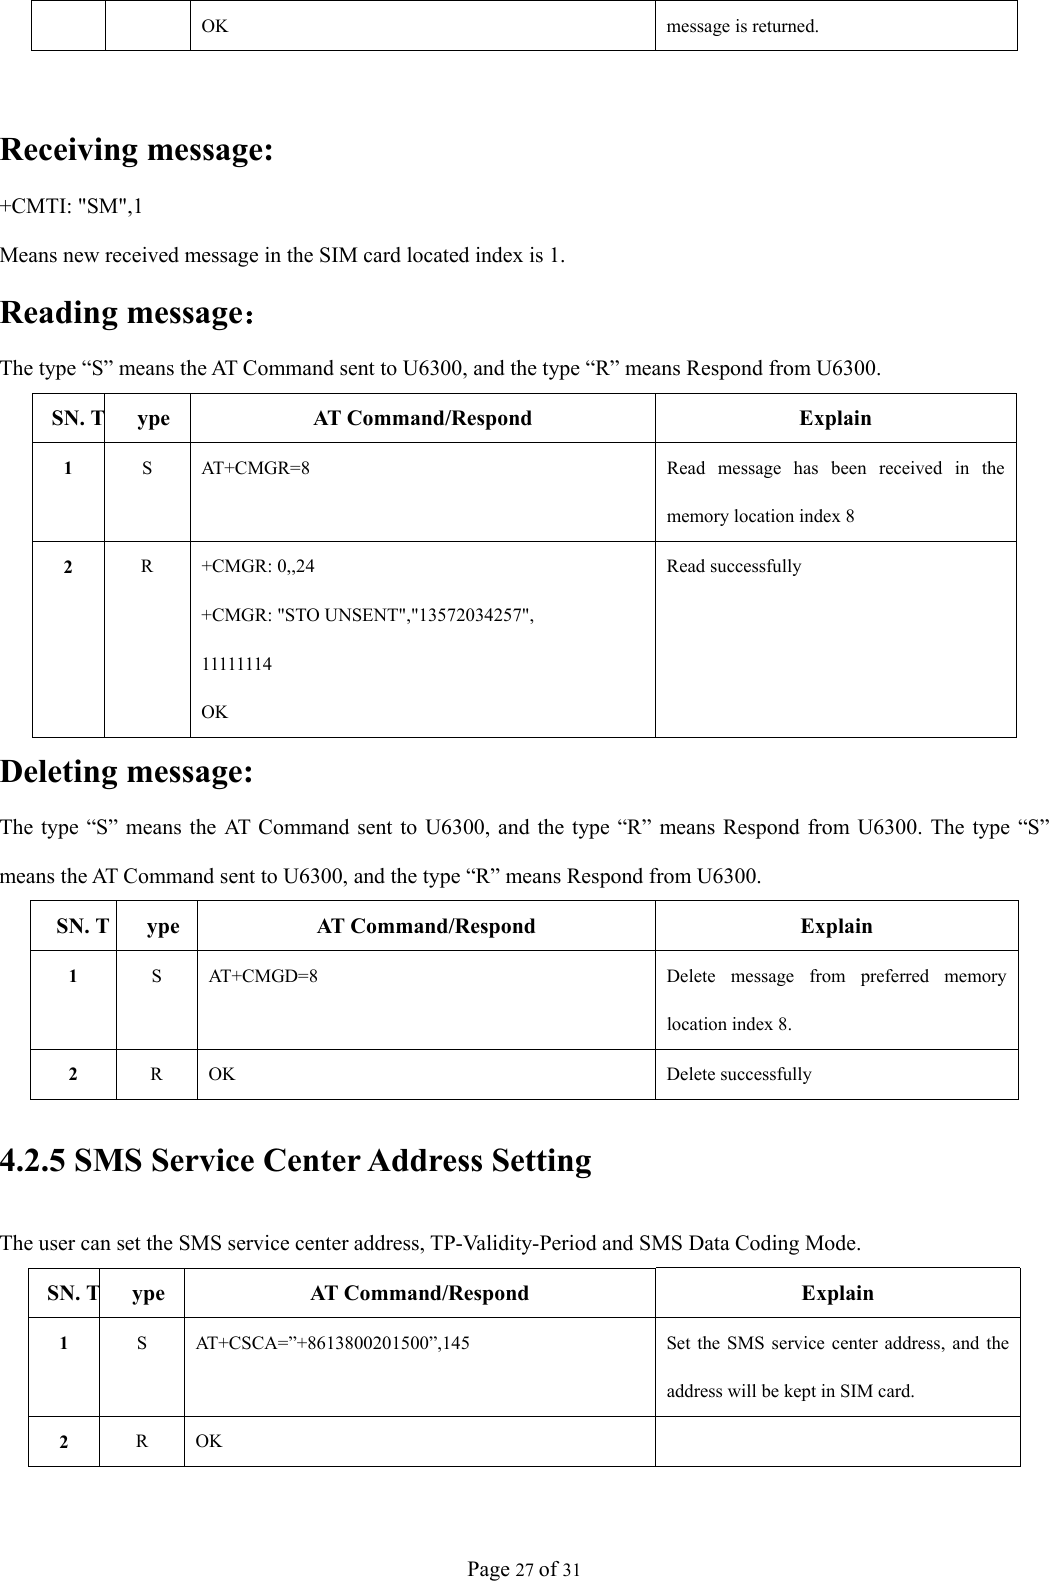 Page 27 of 31 OK  message is returned.  Receiving message: +CMTI: &quot;SM&quot;,1 Means new received message in the SIM card located index is 1. Reading message： The type “S” means the AT Command sent to U6300, and the type “R” means Respond from U6300. SN. T ype  AT Command/Respond  Explain 1  S  AT+CMGR=8  Read message has been received in the memory location index 8 2  R +CMGR: 0,,24 +CMGR: &quot;STO UNSENT&quot;,&quot;13572034257&quot;, 11111114 OK Read successfully Deleting message: The type “S” means the AT Command sent to U6300, and the type “R” means Respond from U6300. The type “S” means the AT Command sent to U6300, and the type “R” means Respond from U6300. SN. T ype  AT Command/Respond  Explain 1  S  AT+CMGD=8  Delete message from preferred memory location index 8. 2  R OK  Delete successfully 4.2.5 SMS Service Center Address Setting The user can set the SMS service center address, TP-Validity-Period and SMS Data Coding Mode. SN. T ype  AT Command/Respond  Explain 1  S  AT+CSCA=”+8613800201500”,145  Set the SMS service center address, and the address will be kept in SIM card. 2  R OK   